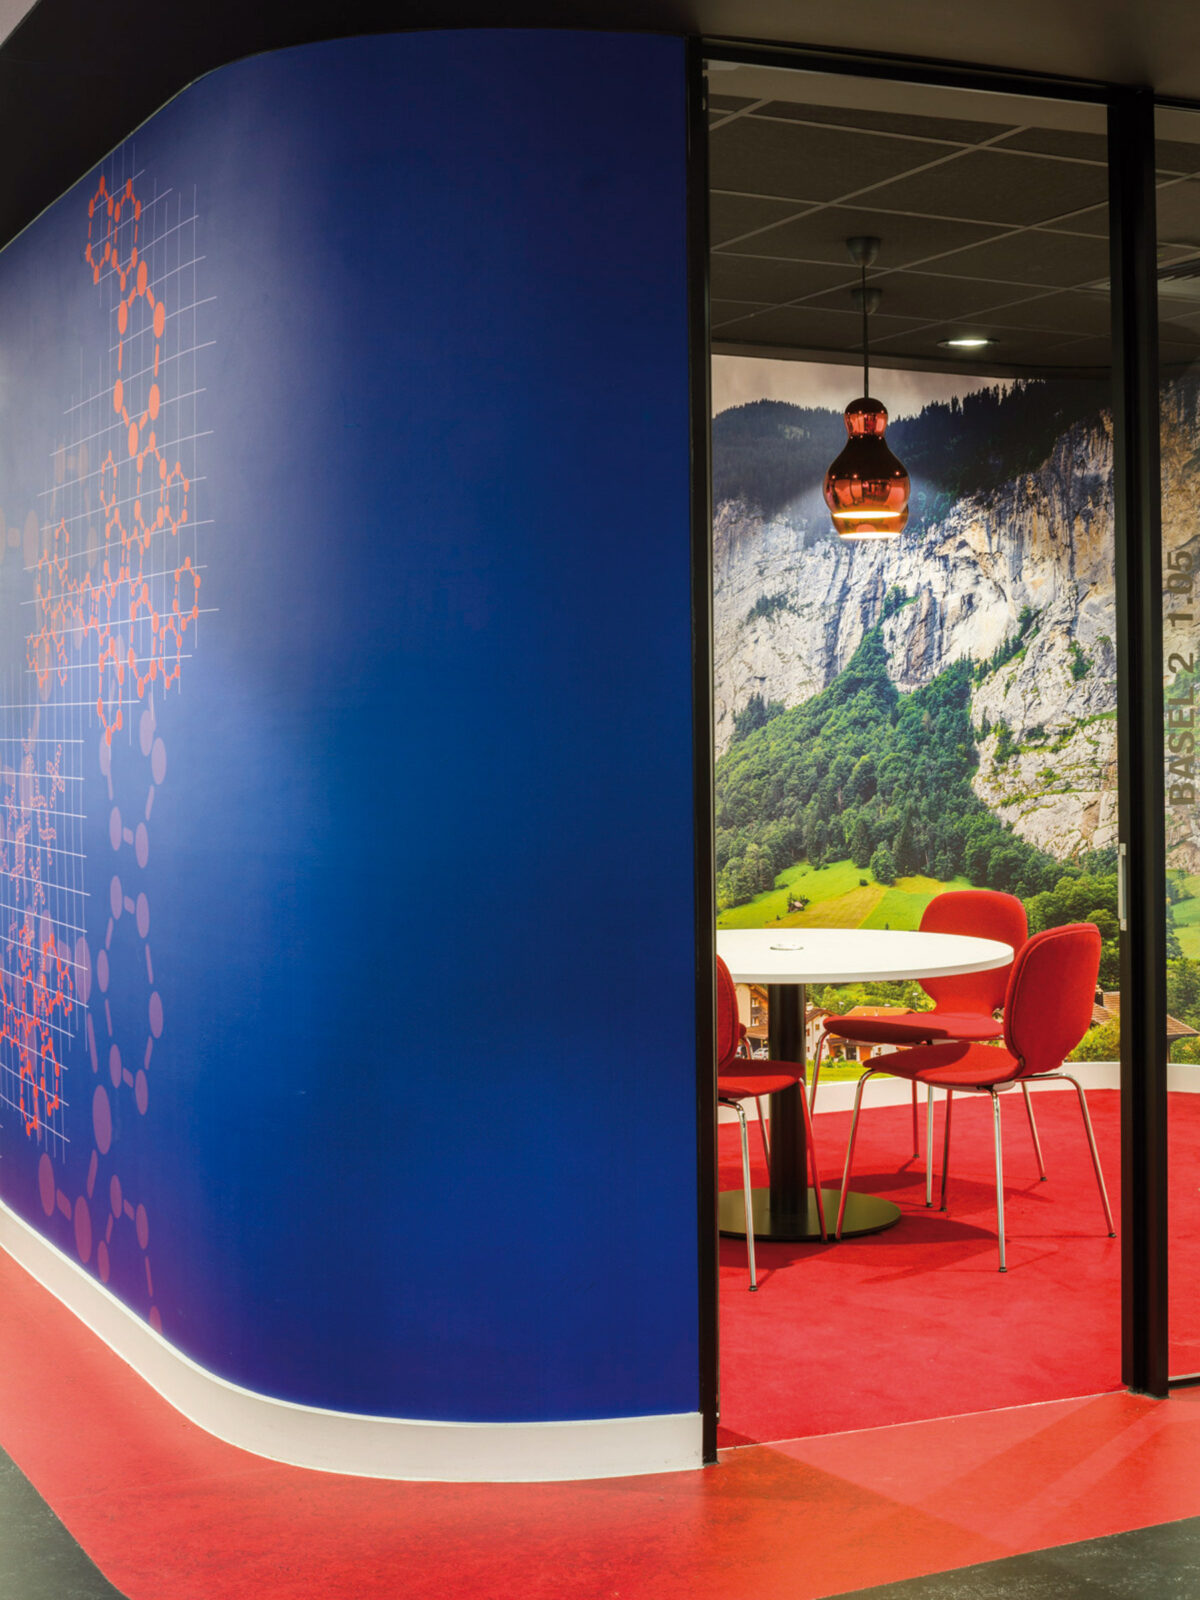 Vibrant interior featuring a curved blue wall with geometric patterns leading to a cozy dining nook with red chairs, a pendant light, and a large scenic photograph of a mountainous landscape.